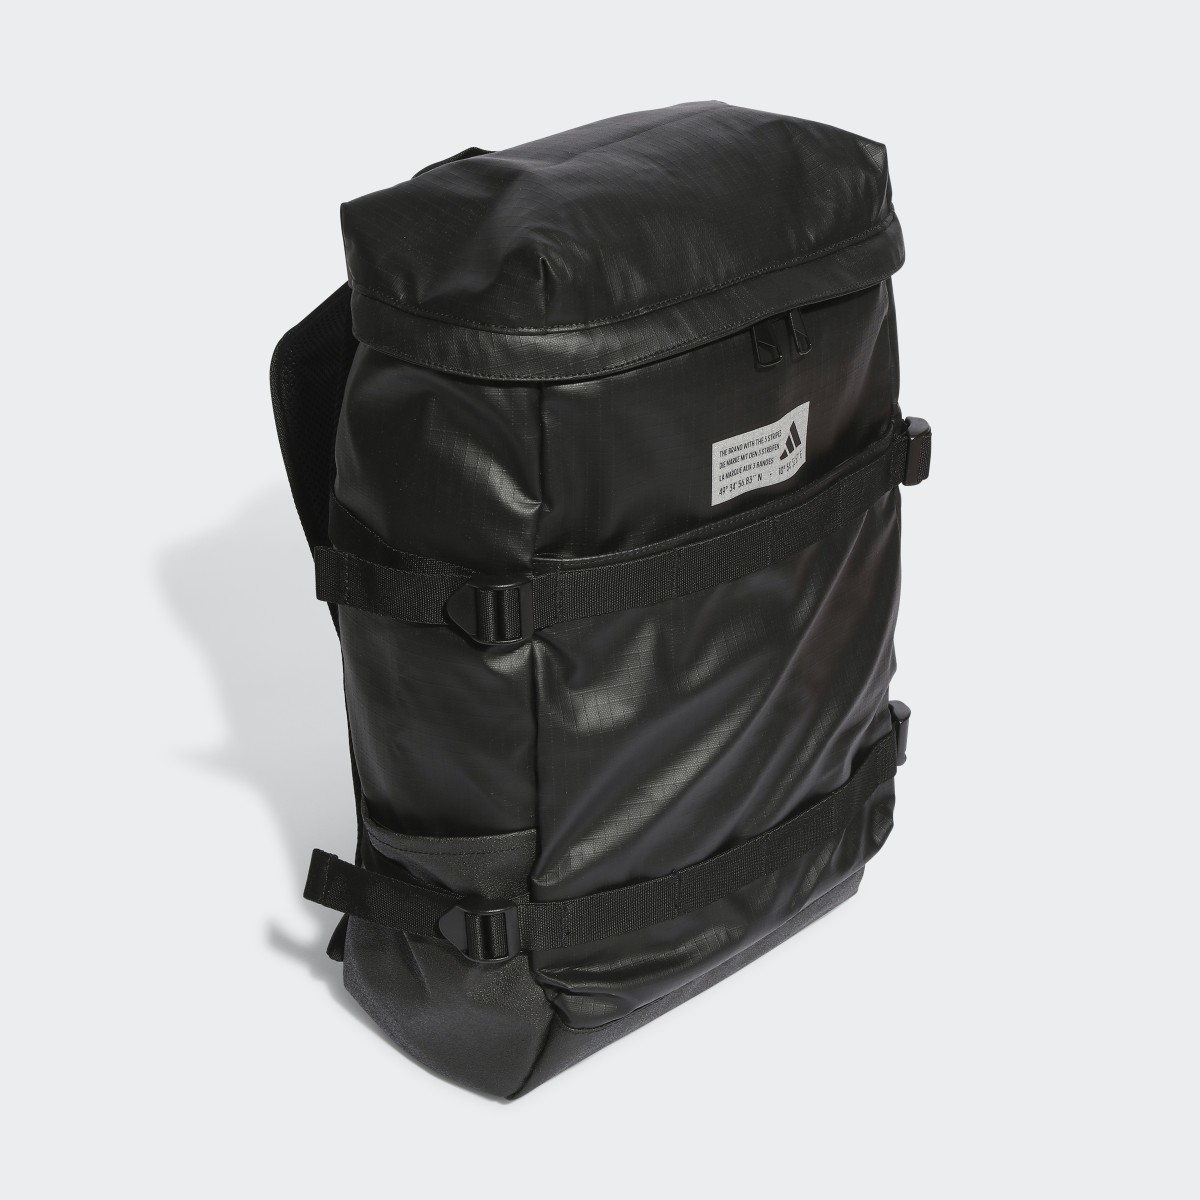 Adidas 4ATHLTS ID Gear Up Backpack. 4